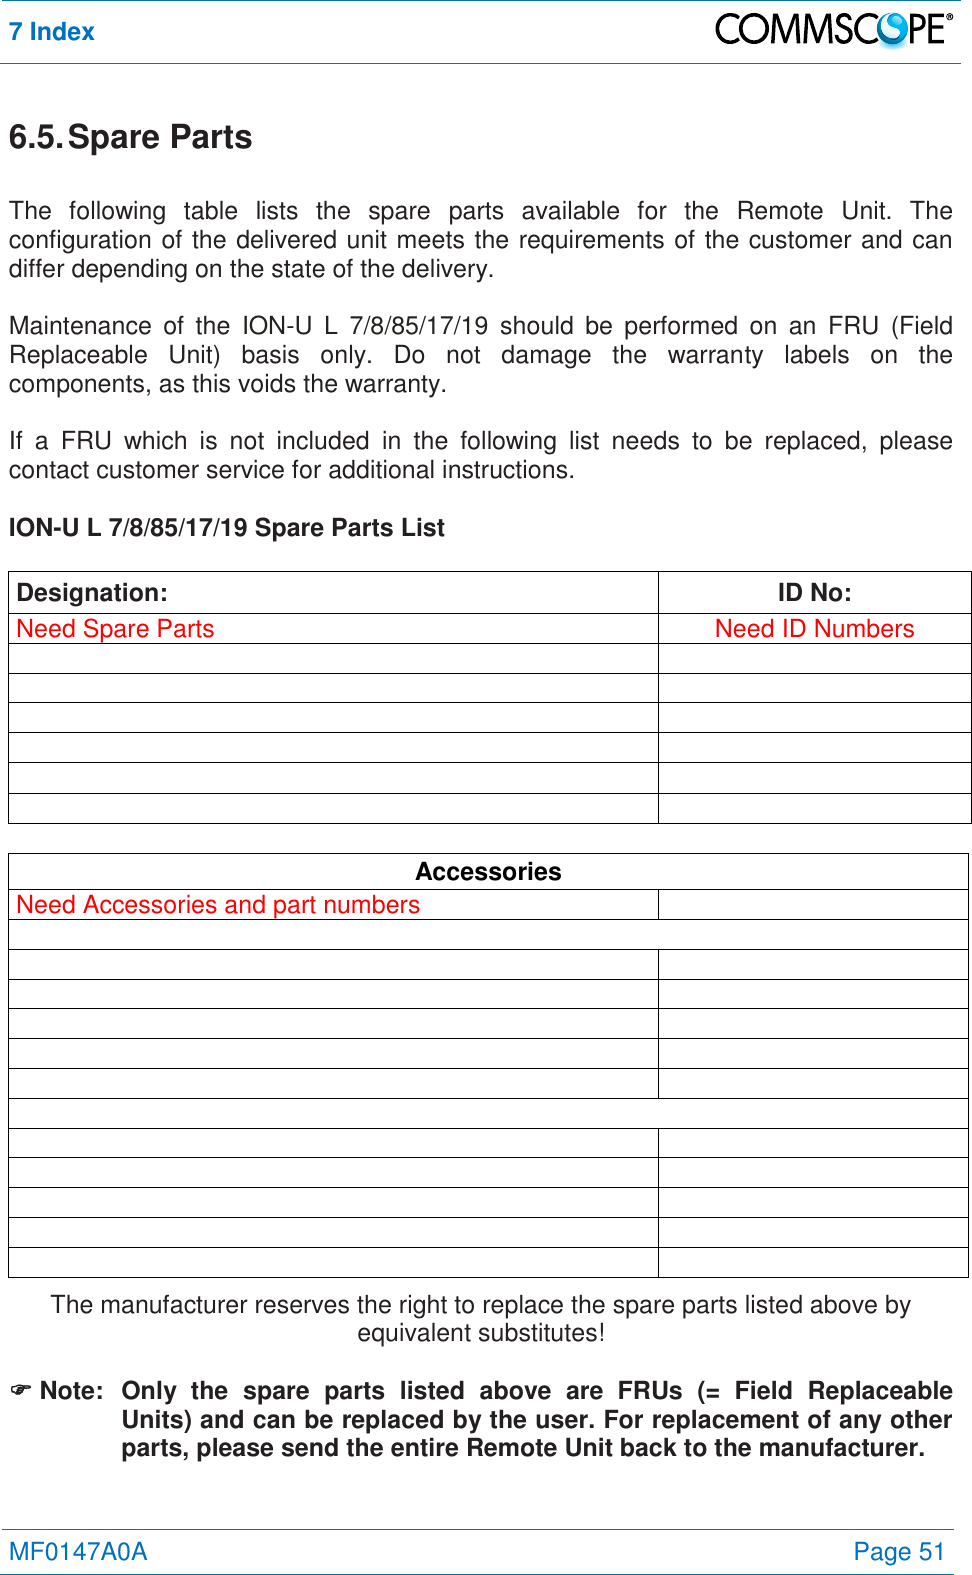 7 Index   MF0147A0A Page 51  6.5. Spare Parts  The  following  table  lists  the  spare  parts  available  for  the  Remote  Unit.  The configuration of the delivered unit meets the requirements of the customer and can differ depending on the state of the delivery.  Maintenance  of  the  ION-U  L  7/8/85/17/19  should  be  performed  on  an  FRU  (Field Replaceable  Unit)  basis  only.  Do  not  damage  the  warranty  labels  on  the components, as this voids the warranty.   If  a  FRU  which  is  not  included  in  the  following  list  needs  to  be  replaced,  please contact customer service for additional instructions.  ION-U L 7/8/85/17/19 Spare Parts List  Designation: ID No: Need Spare Parts Need ID Numbers              Accessories Need Accessories and part numbers                        The manufacturer reserves the right to replace the spare parts listed above by equivalent substitutes!   Note:  Only  the  spare  parts  listed  above  are  FRUs  (=  Field  Replaceable Units) and can be replaced by the user. For replacement of any other parts, please send the entire Remote Unit back to the manufacturer.   